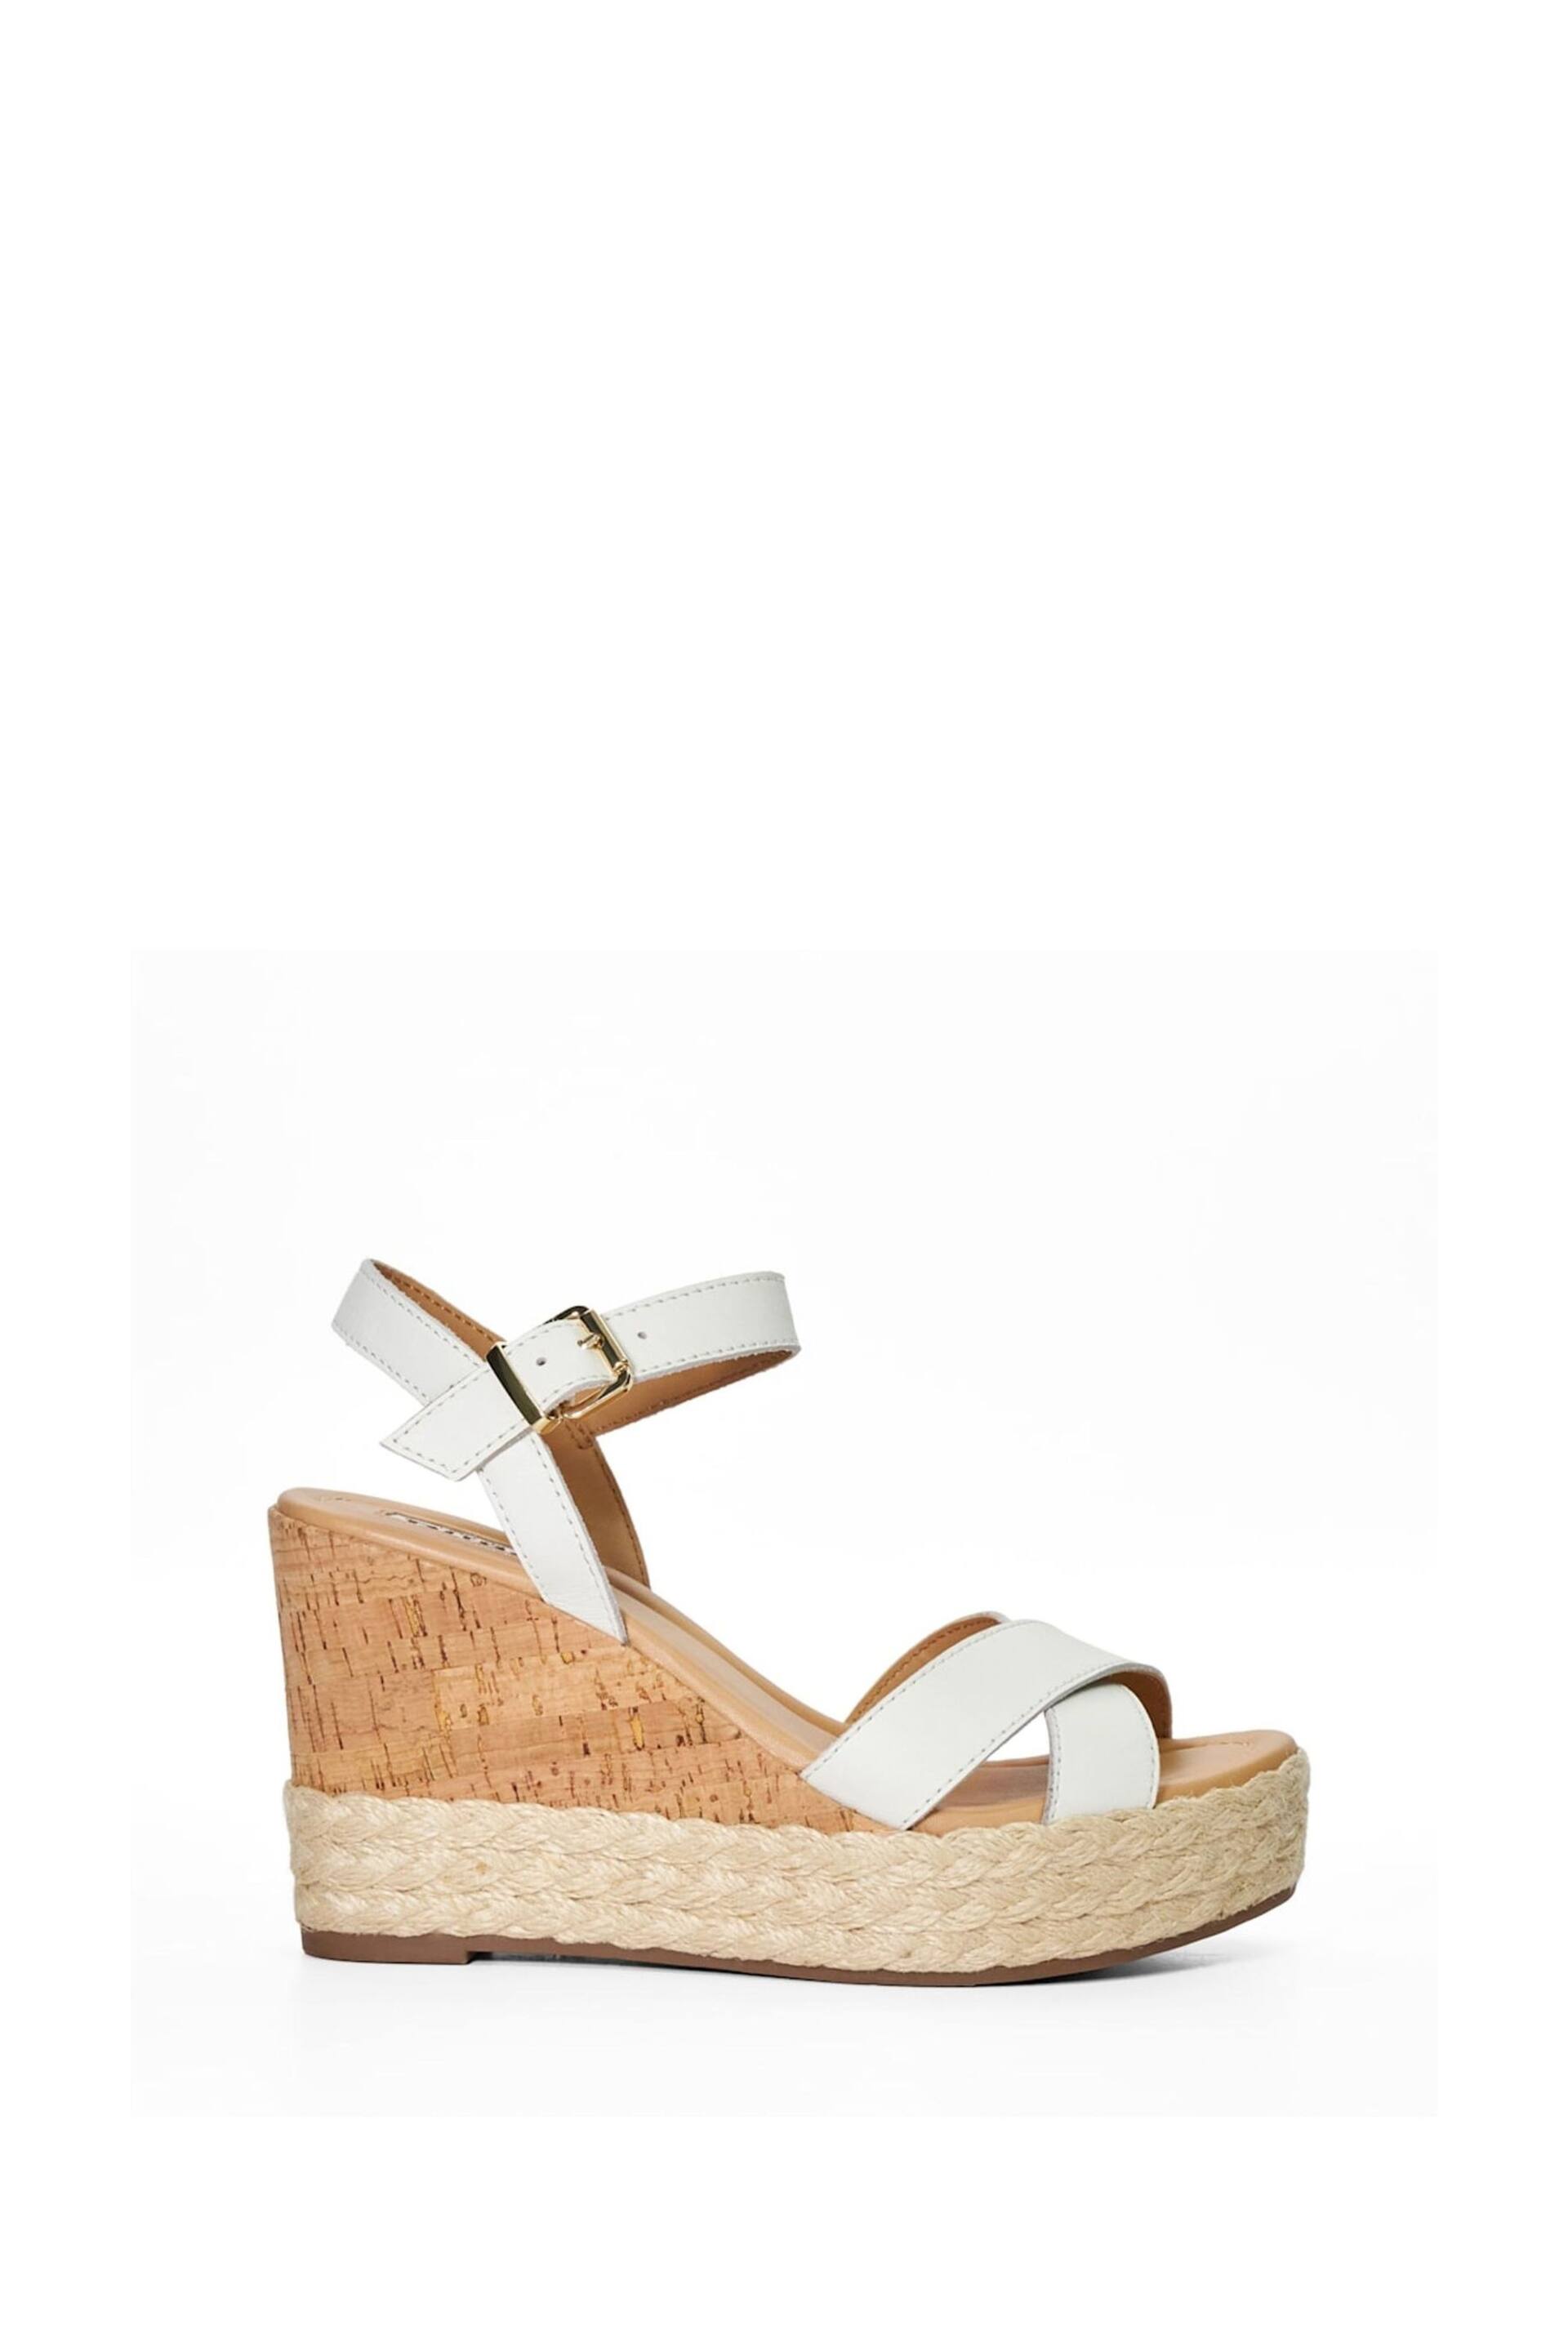 Dune London White Kindest Cross Strap Wedge Sandals - Image 3 of 6